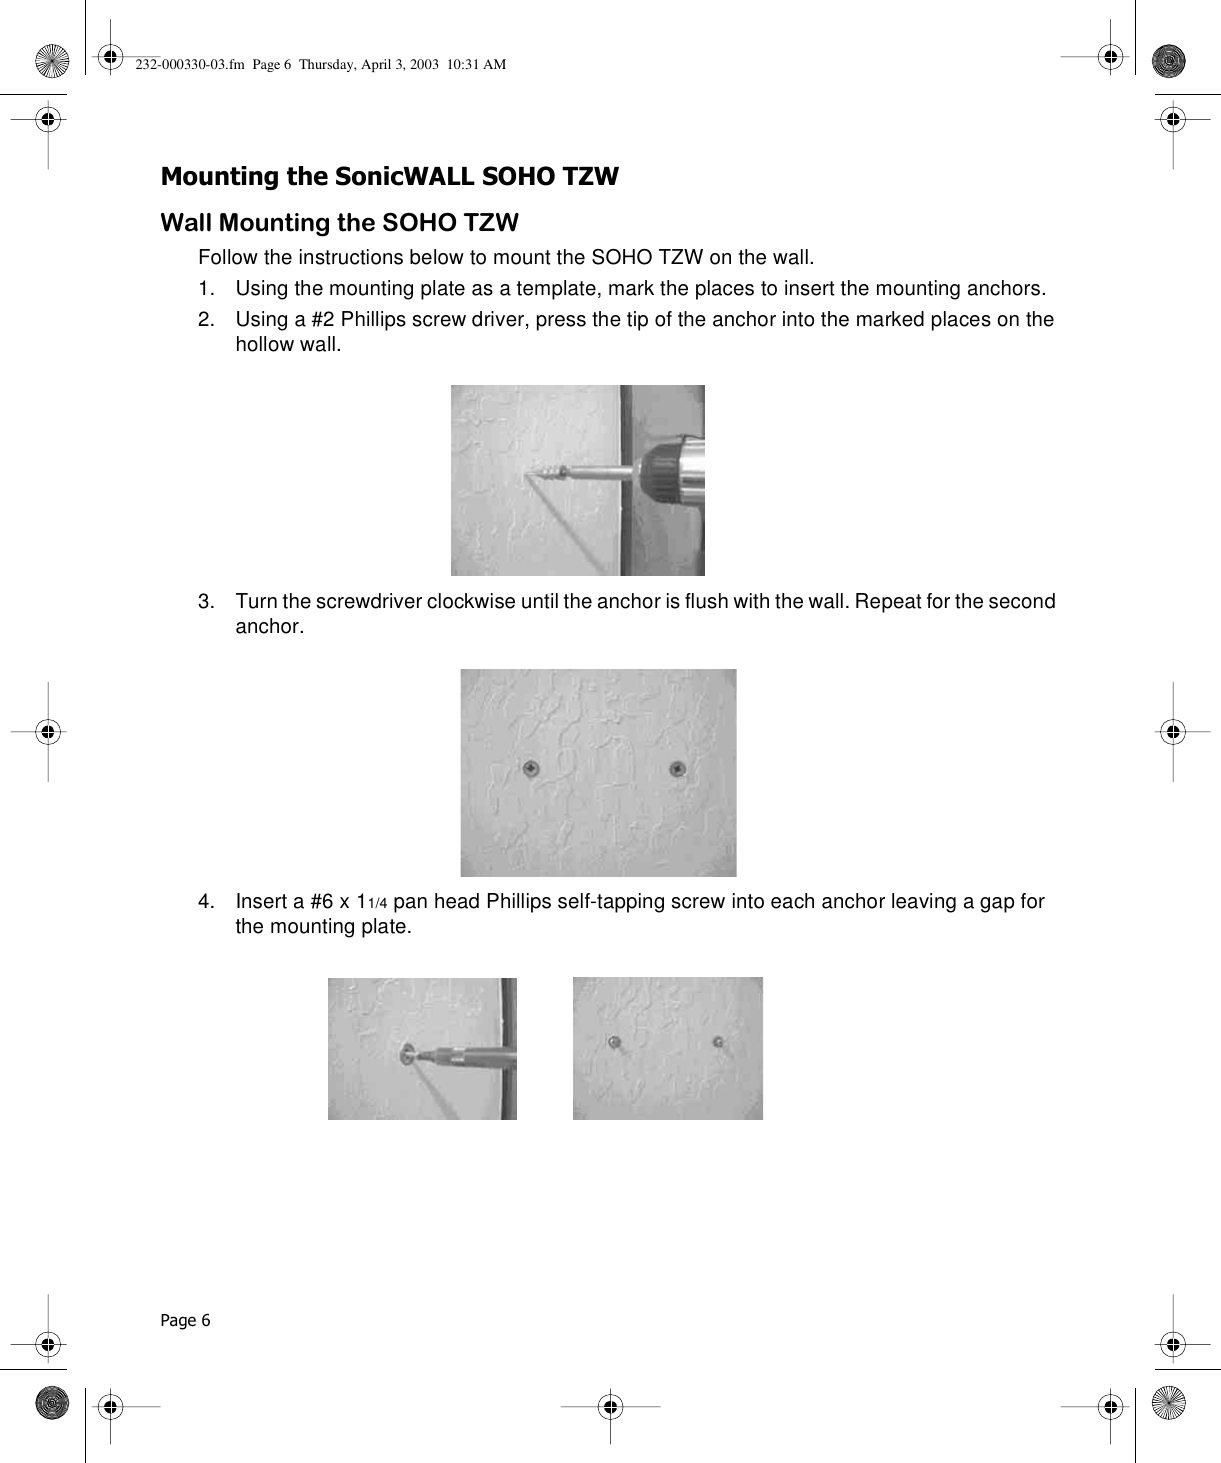 Page 6 Mounting the SonicWALL SOHO TZWWall Mounting the SOHO TZWFollow the instructions below to mount the SOHO TZW on the wall.1. Using the mounting plate as a template, mark the places to insert the mounting anchors.2. Using a #2 Phillips screw driver, press the tip of the anchor into the marked places on the hollow wall. 3. Turn the screwdriver clockwise until the anchor is flush with the wall. Repeat for the second anchor.4. Insert a #6 x 11/4 pan head Phillips self-tapping screw into each anchor leaving a gap for the mounting plate.232-000330-03.fm  Page 6  Thursday, April 3, 2003  10:31 AM